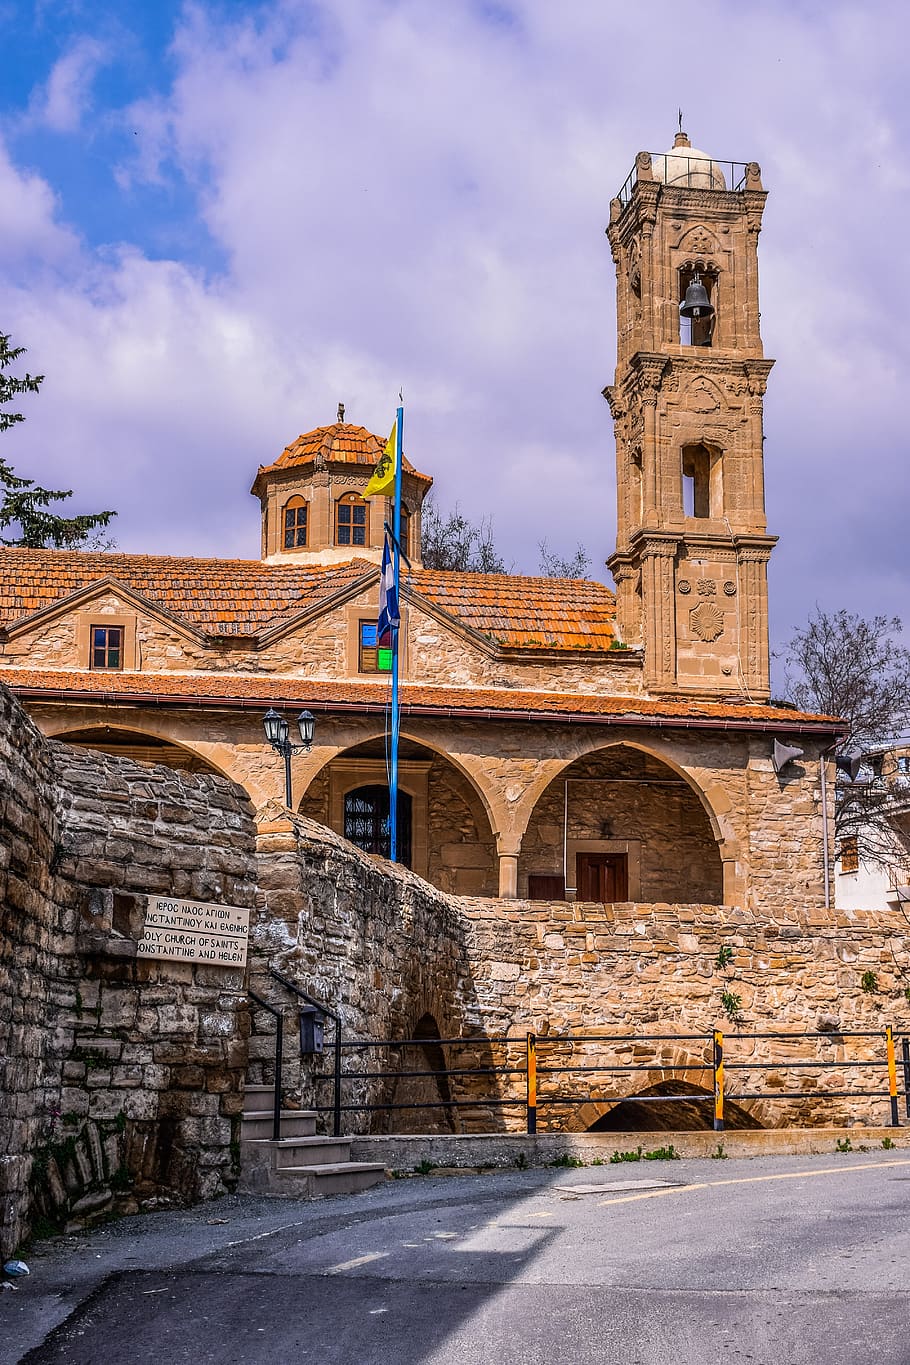 cyprus, tochni, architecture, traditional, church, old, building, christianity, religion, stone